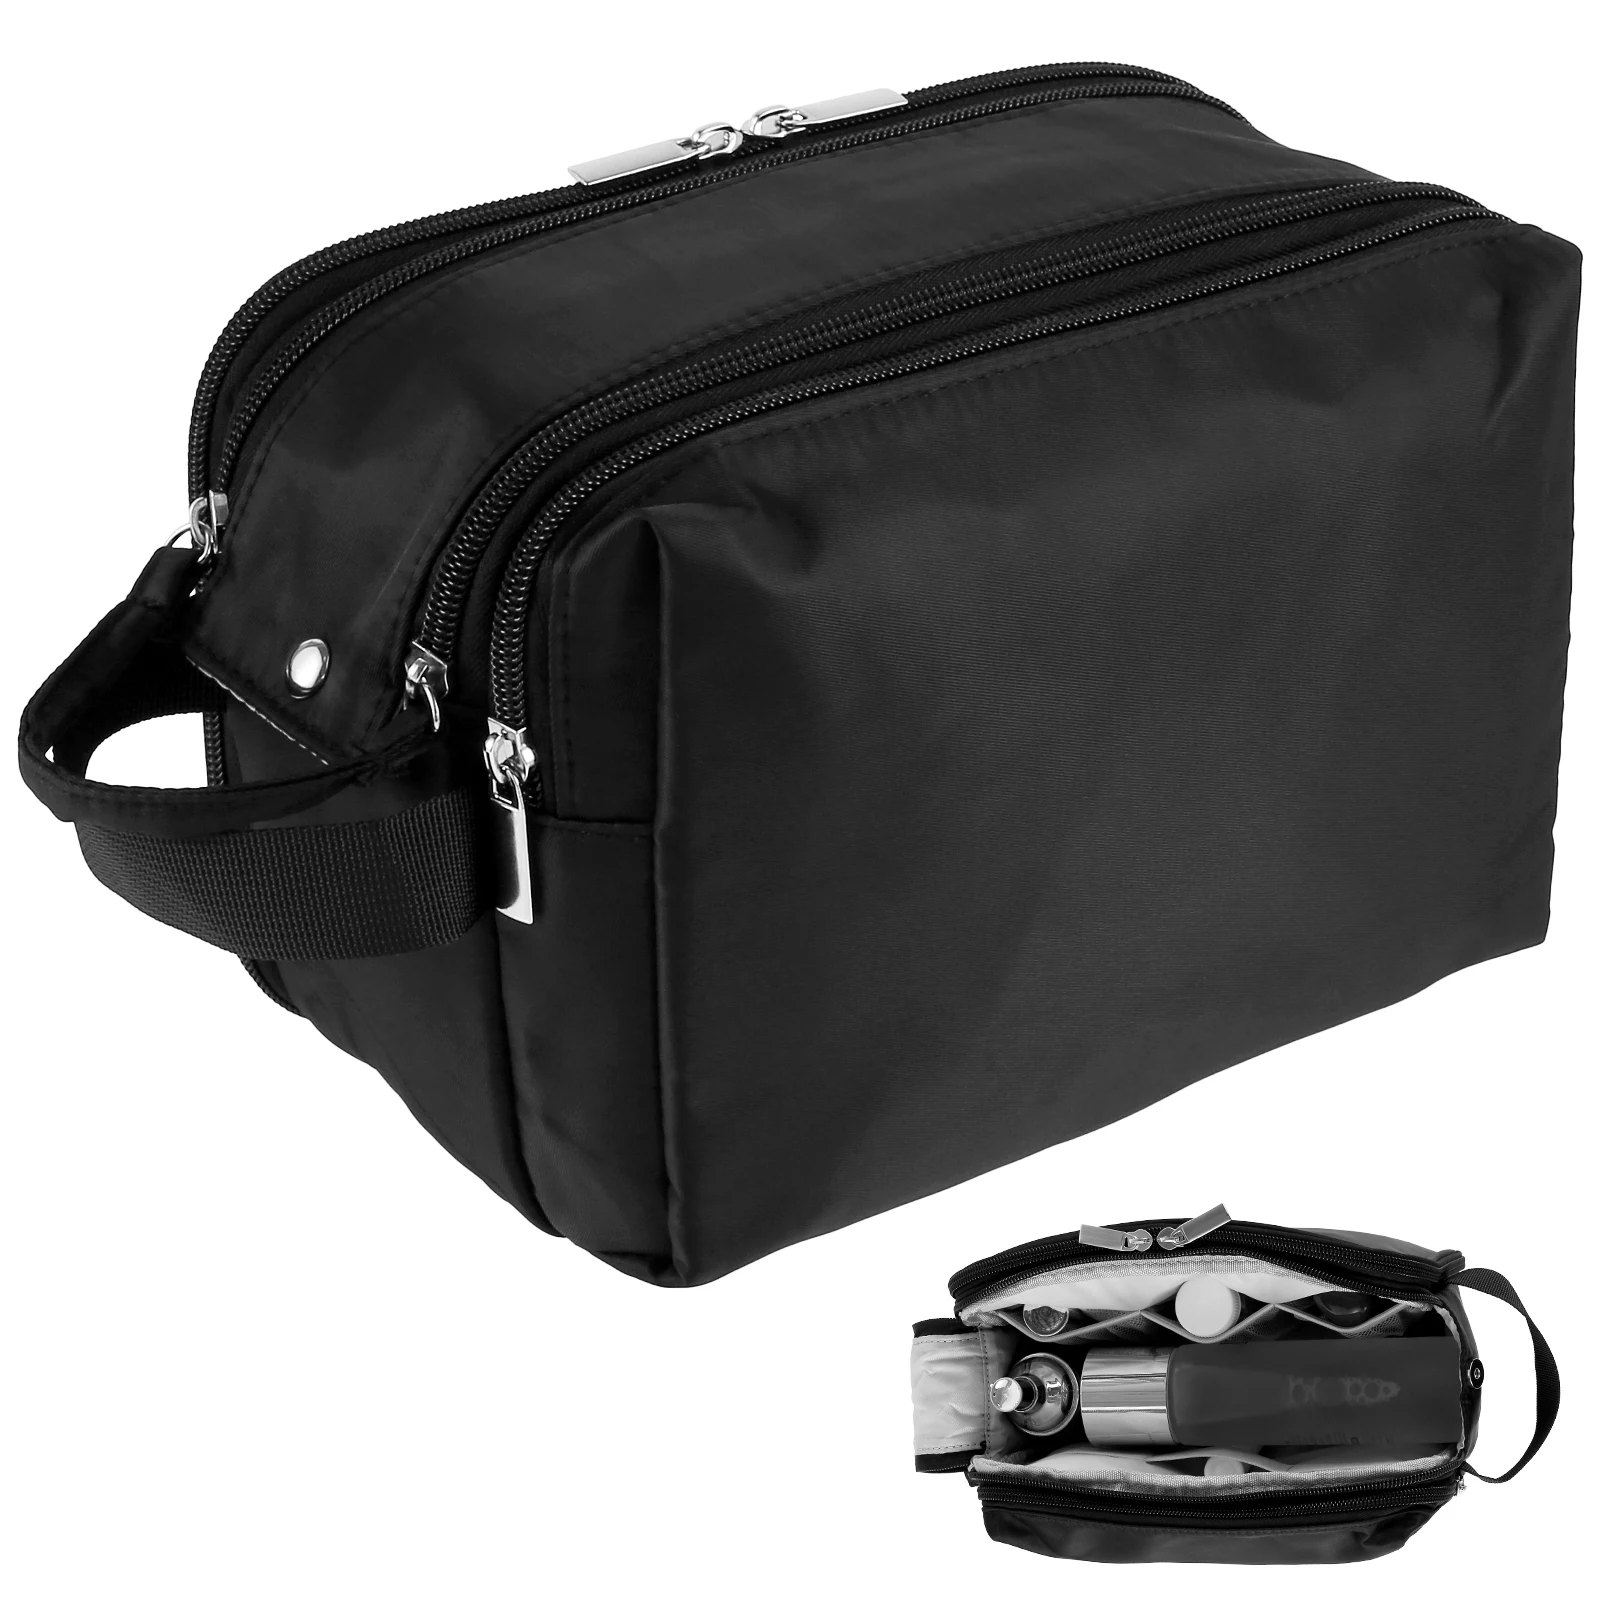 

Toiletry Bag Waterproof Travel Toiletry Bag Multiple Compartments Wash Bag Large Capacity Travel Shaving Bag Double Zipper